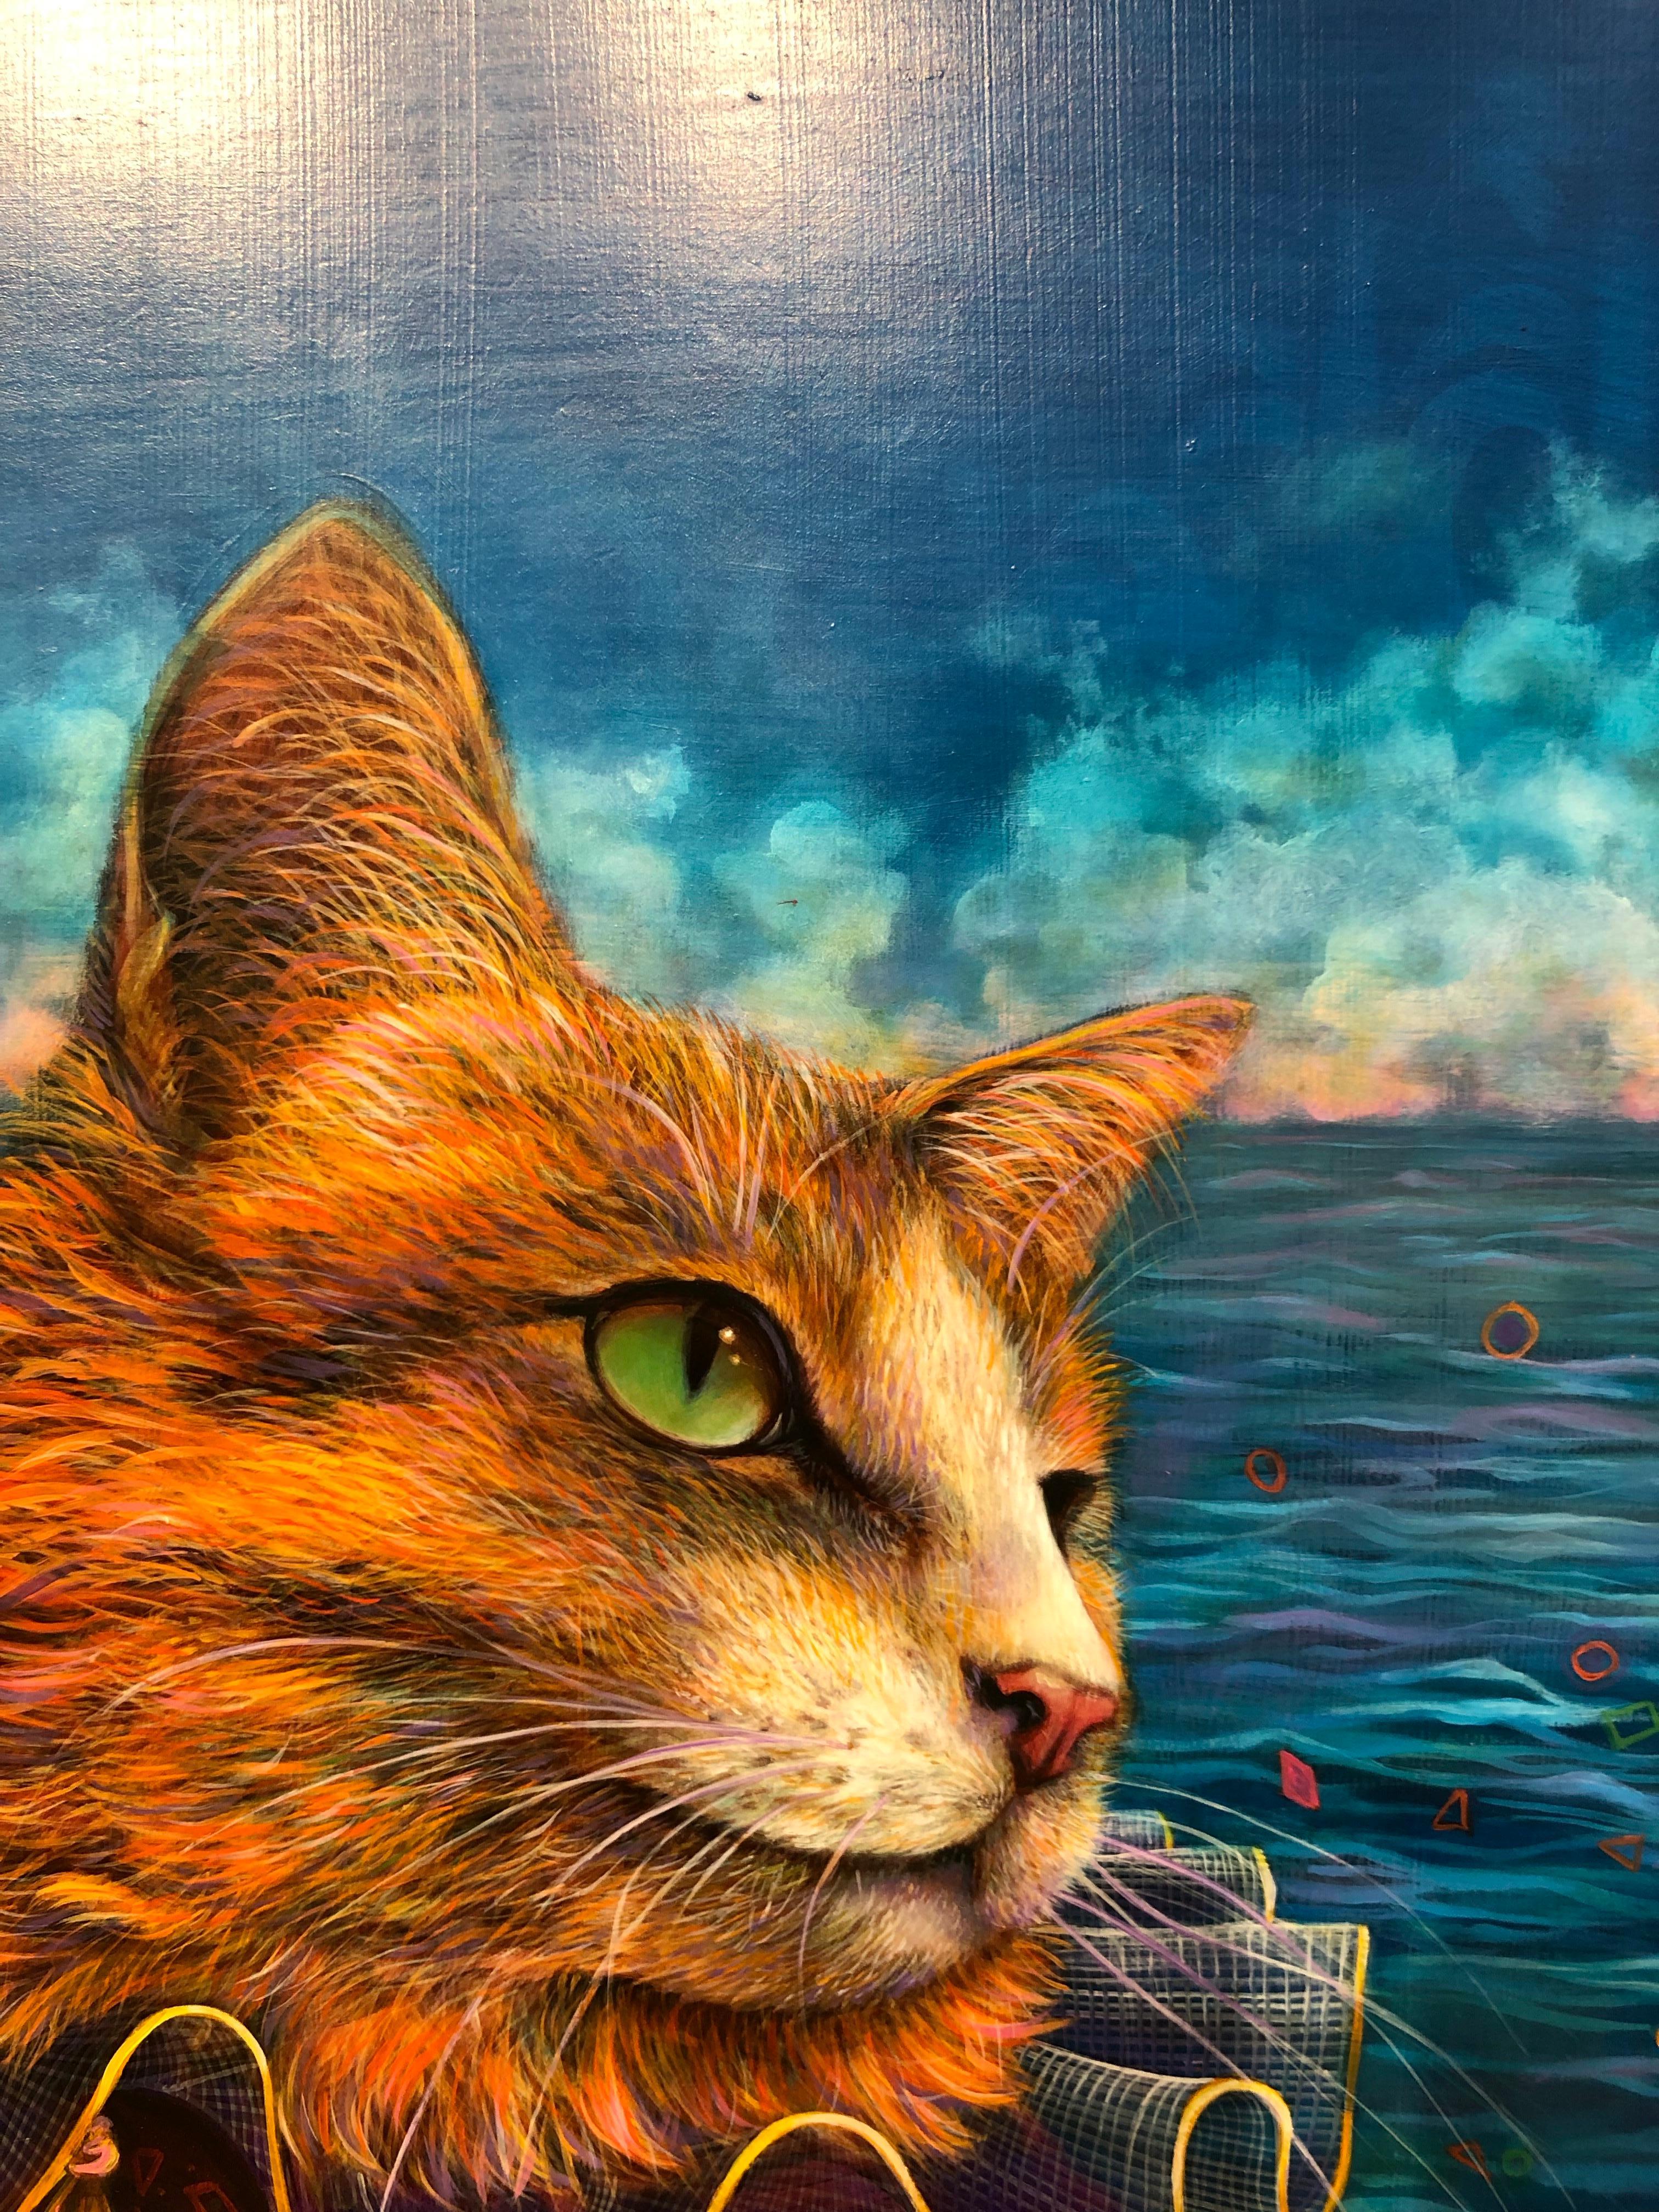 Tricks - Original Oil Painting, Anthropomorphic Scene with Cat and Seagull For Sale 5